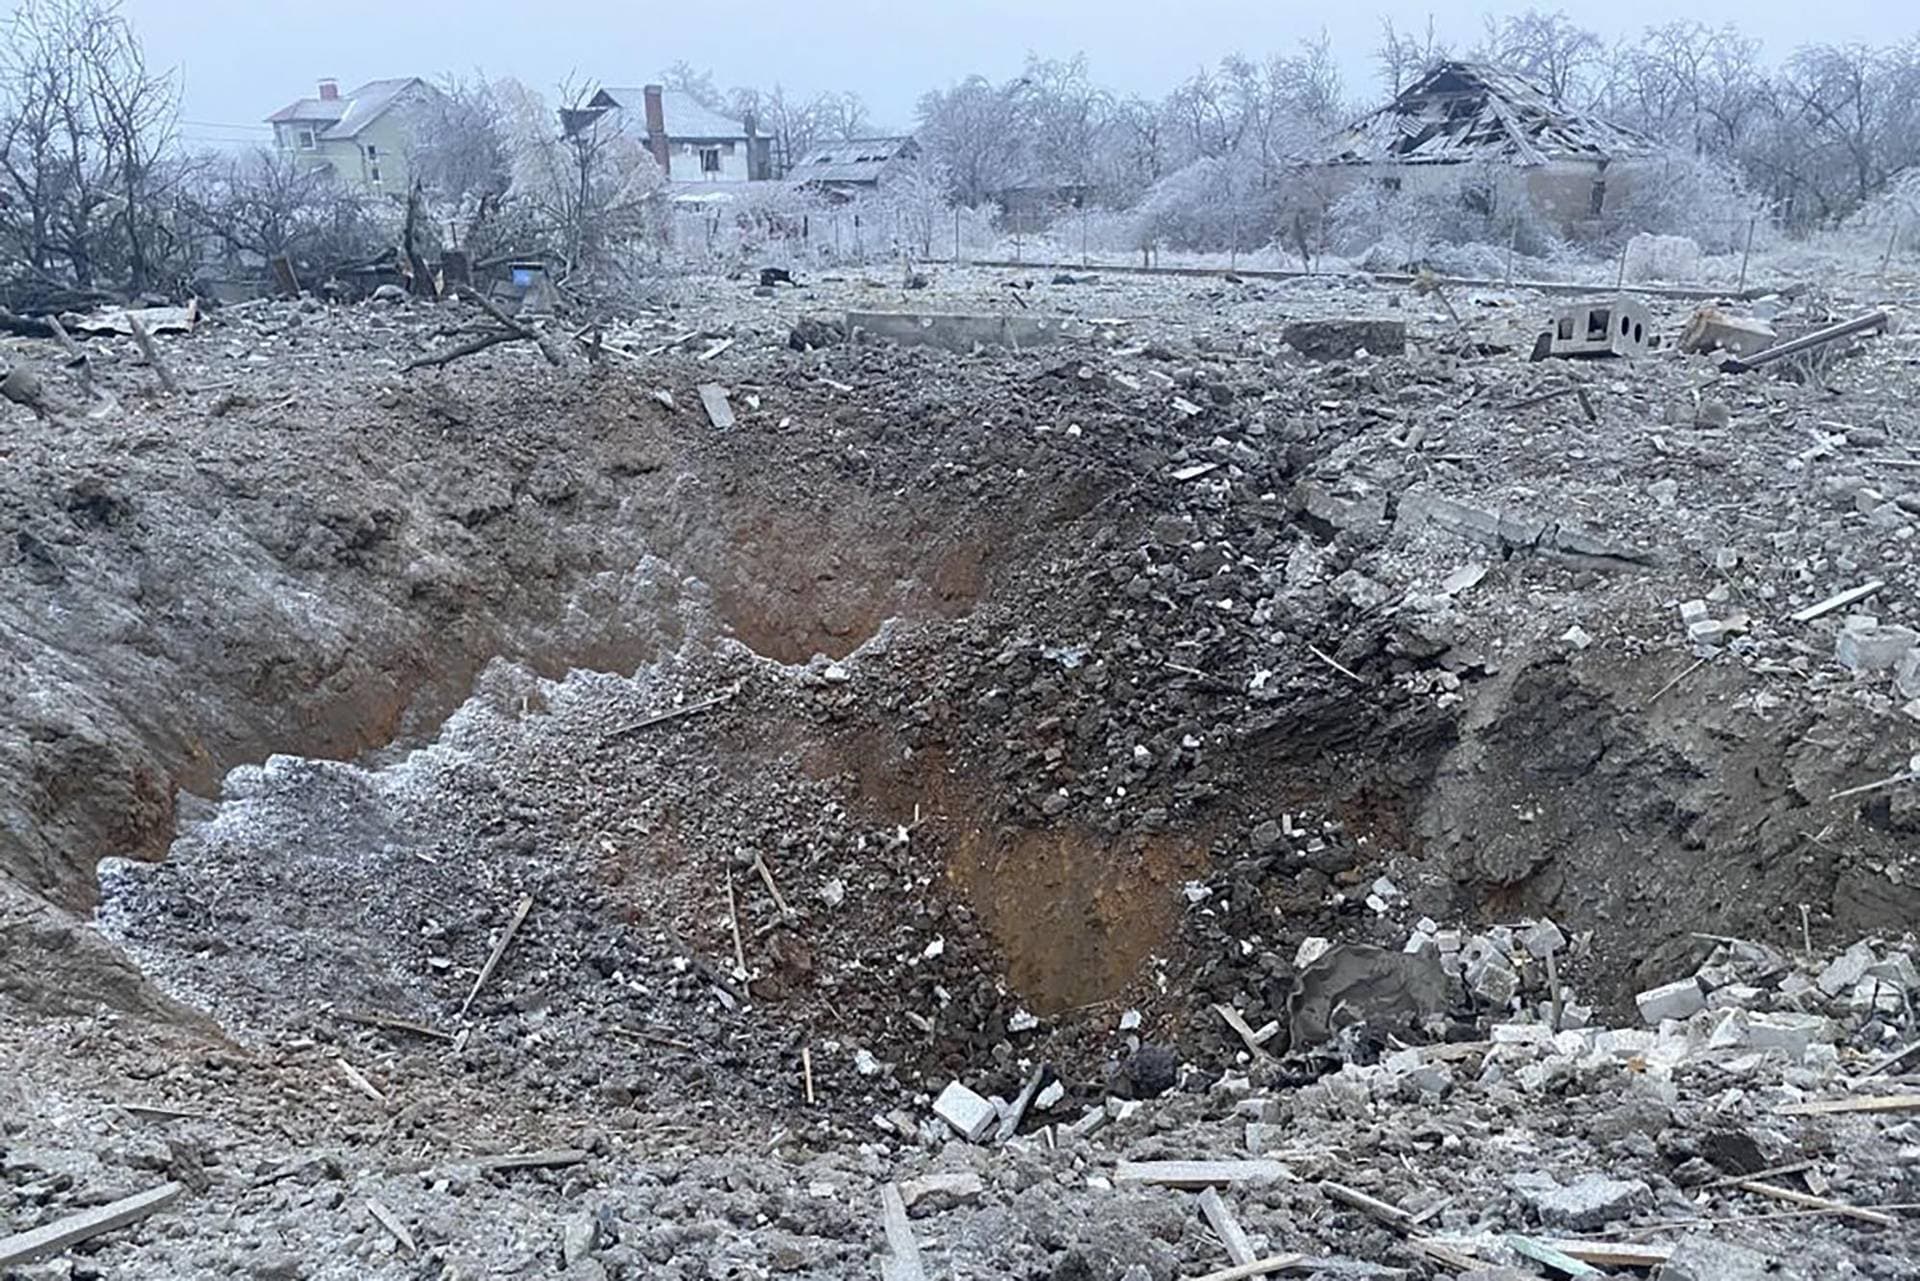 The crater of an explosion after a Russian missile attack in Novomoskovsk